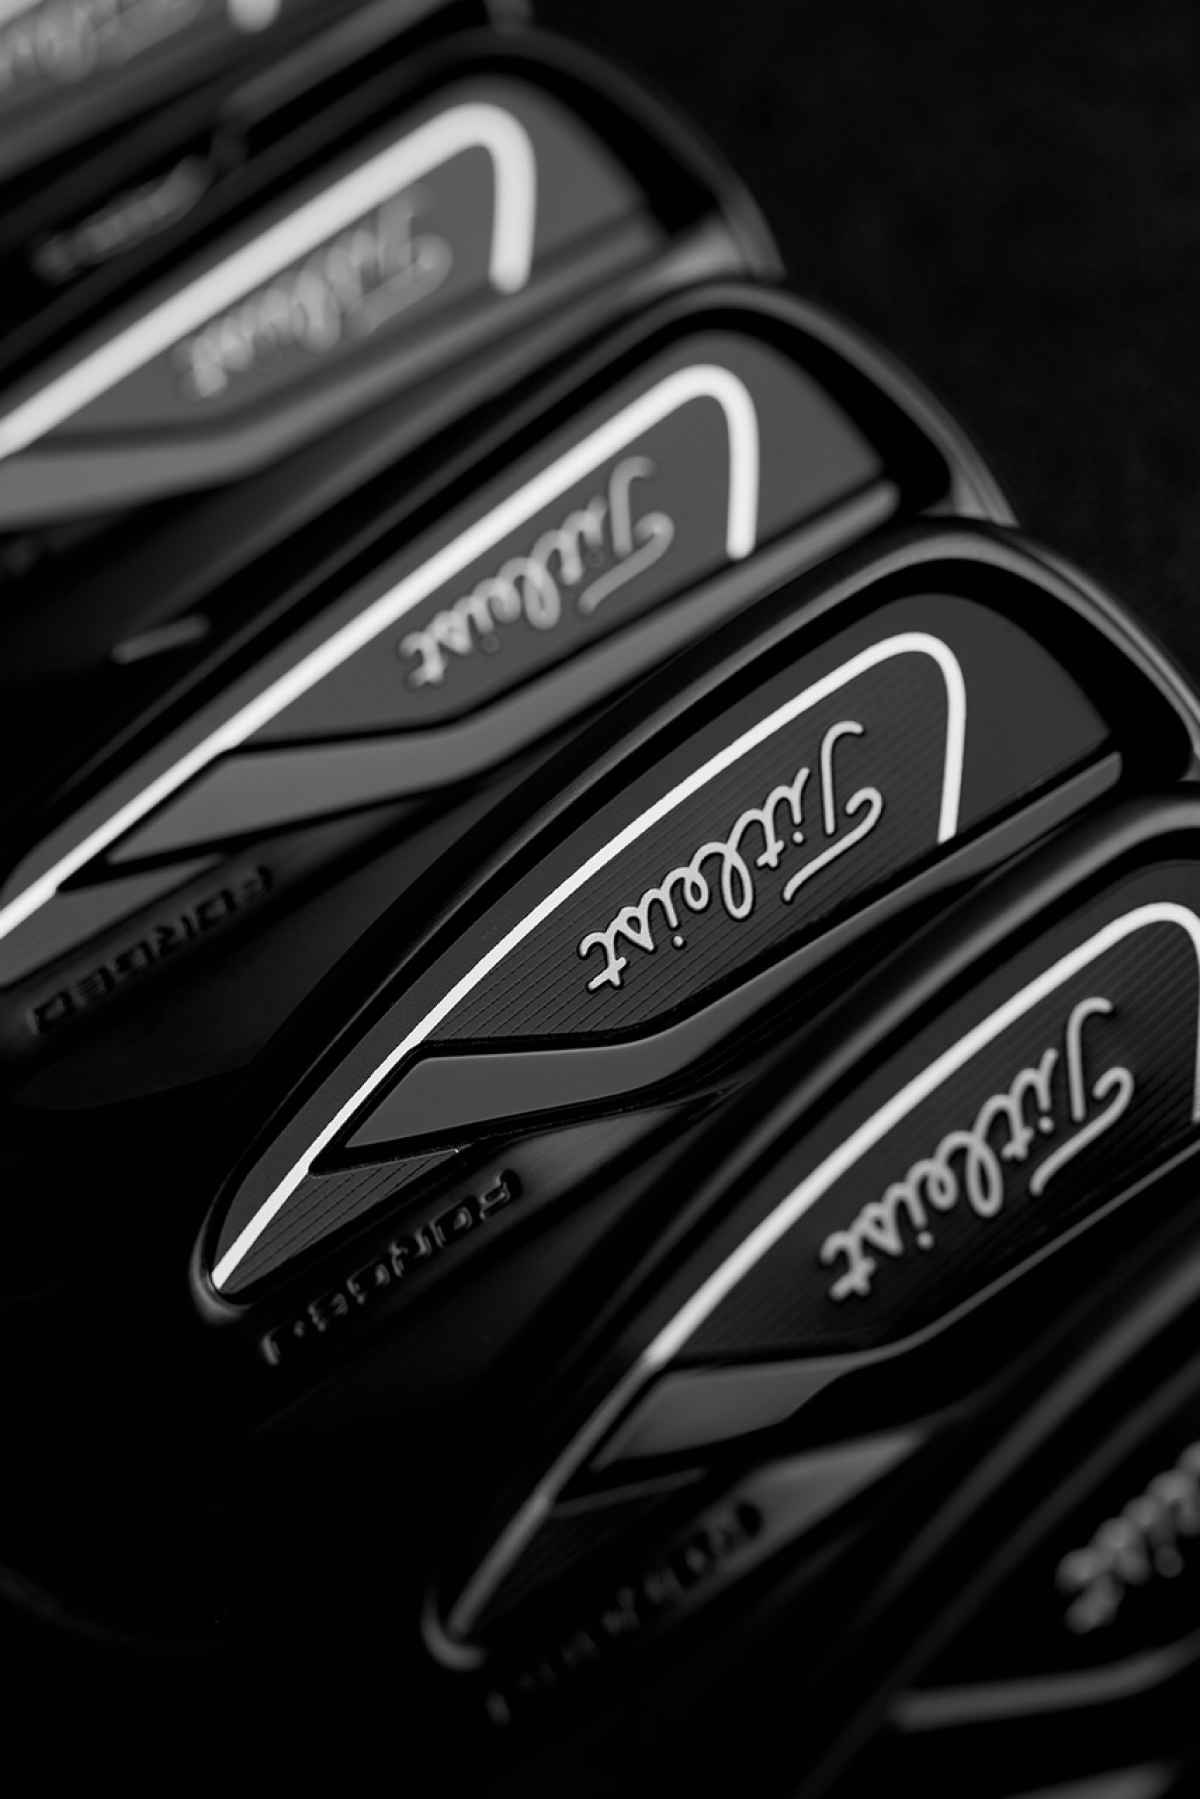 Titleist introduces 718 AP2 and AP3 irons in LIMITED BLACK finish